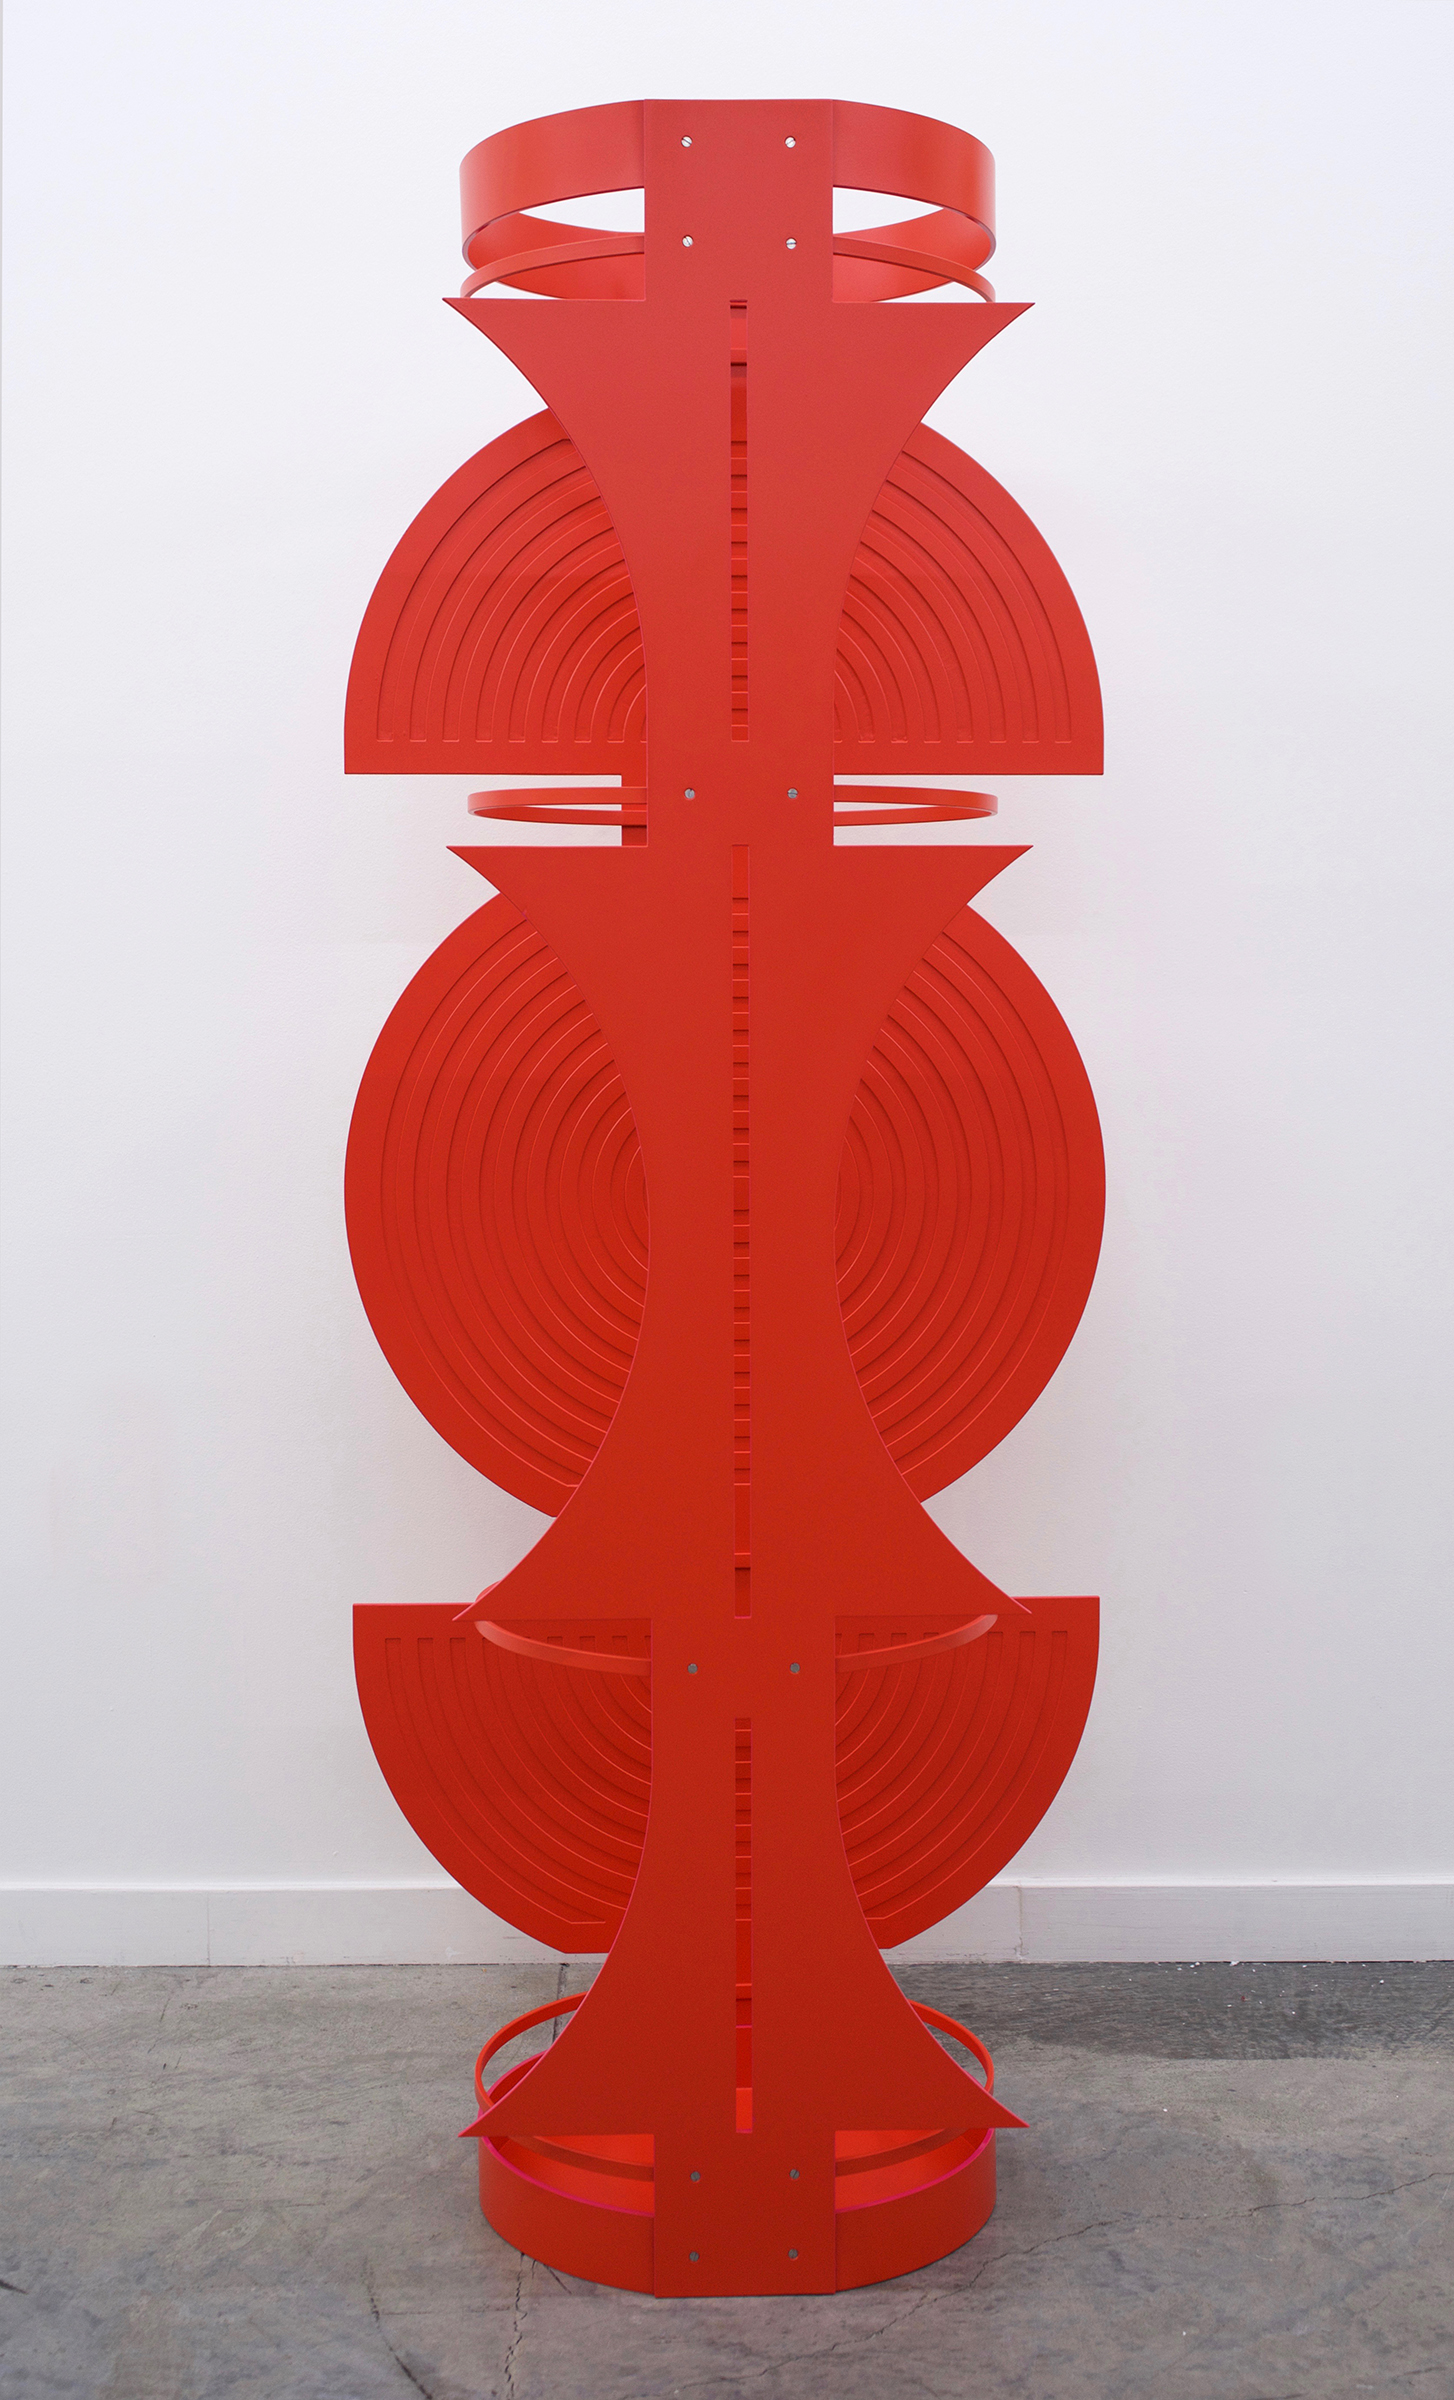  ELISE FERGUSON  Armour , 2019 powder coated aluminum with stainless steel fasteners 66” x 28” x 18” 